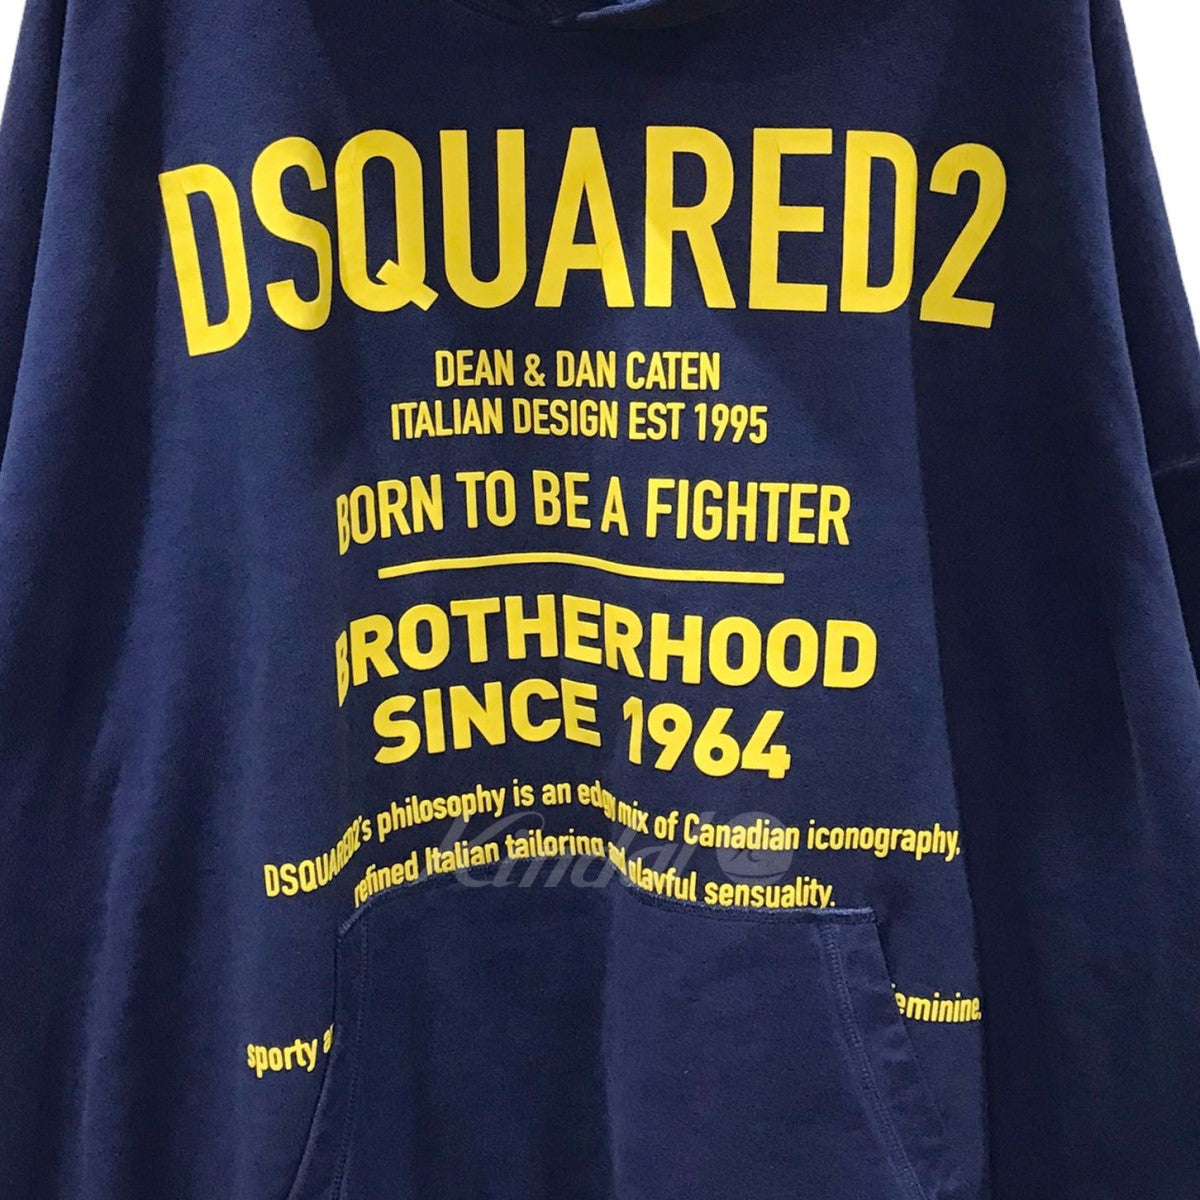 DSQUARED2(ディースクエアード) ロゴプリントプルオーバーパーカー BORN TO BE A FIGHTER Yoyo Fit